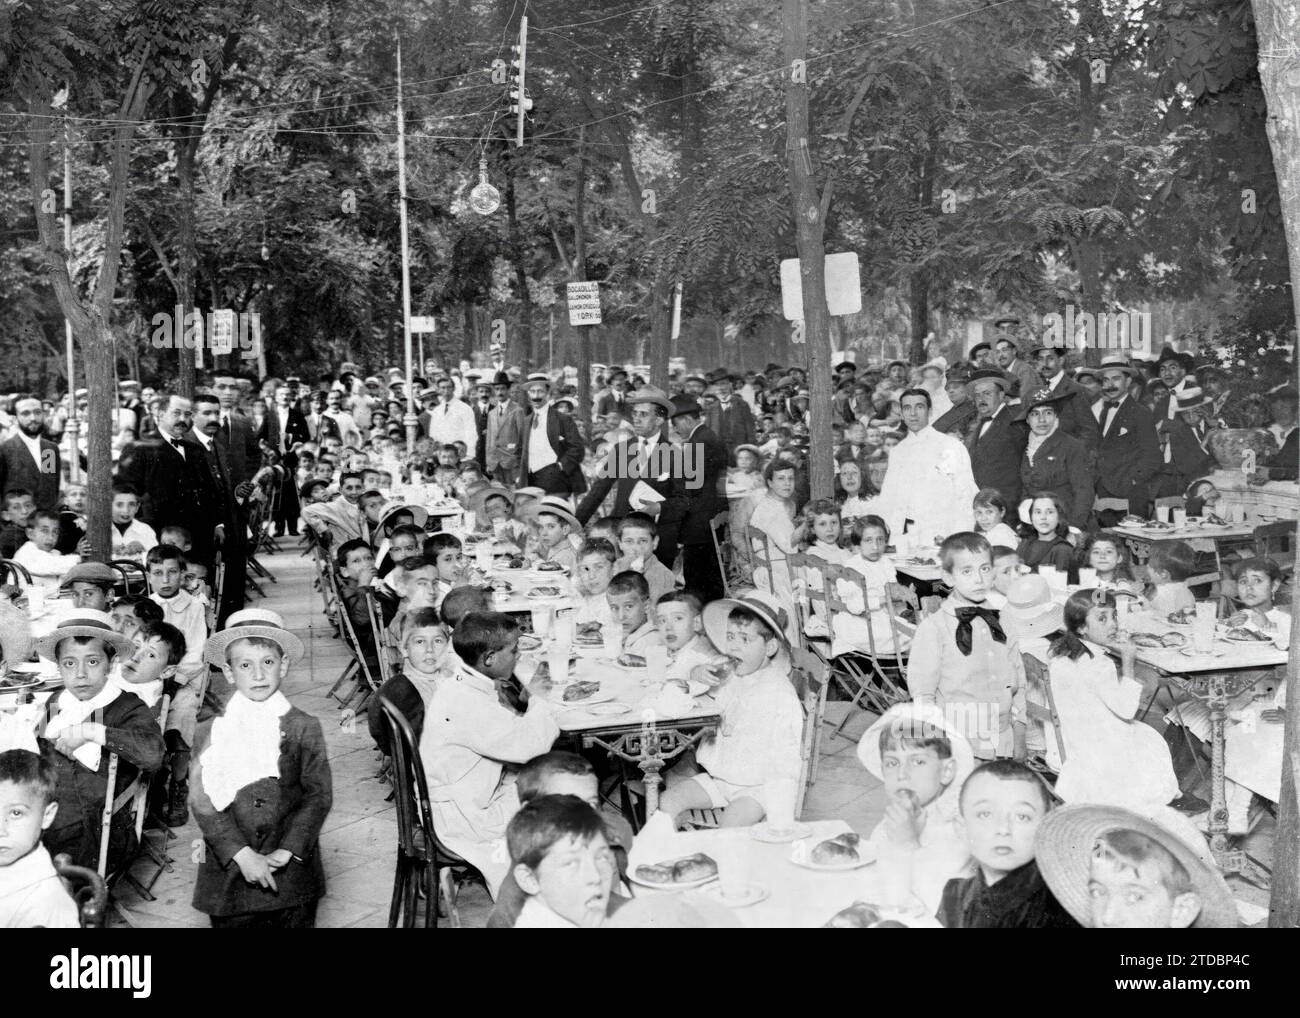 06/11/1916. Yesterday's children's party at the Retiro. The Children of the Maurist Schools during the snack with which they were presented by the youth of the party. Credit: Album / Archivo ABC / Ramón Alba Stock Photo